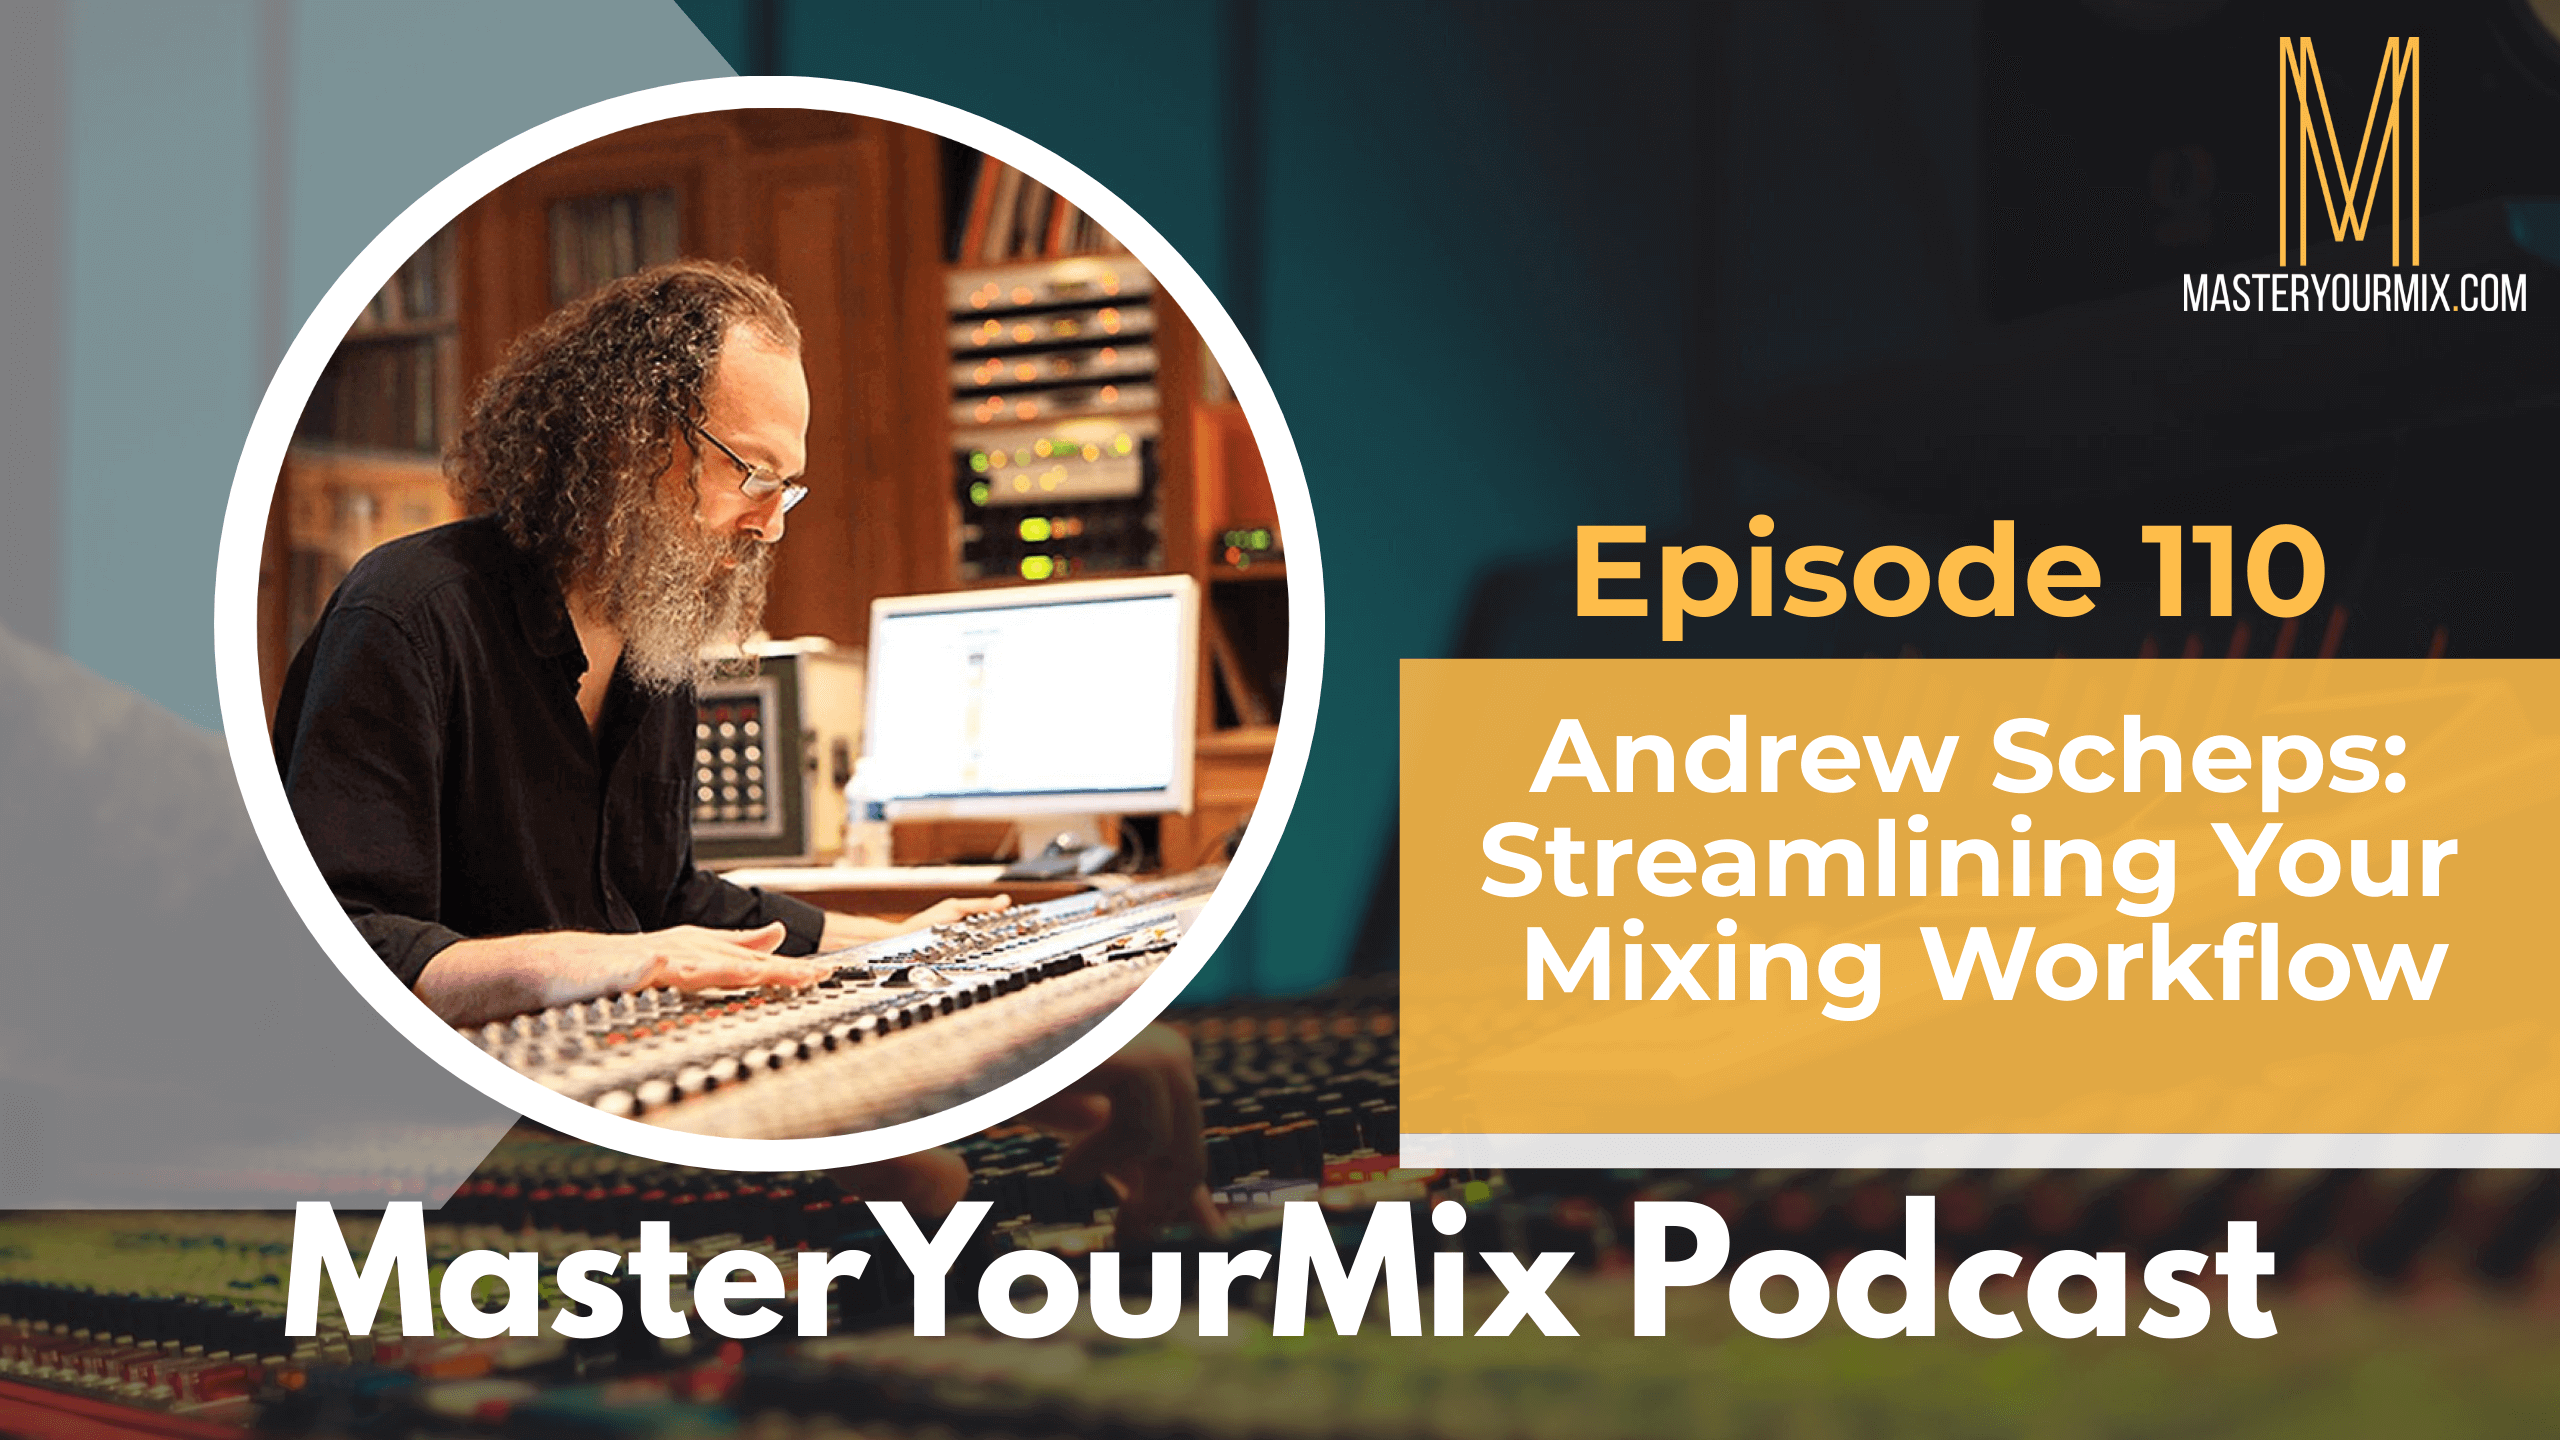 master your mix podcast, ep 110 andrew scheps